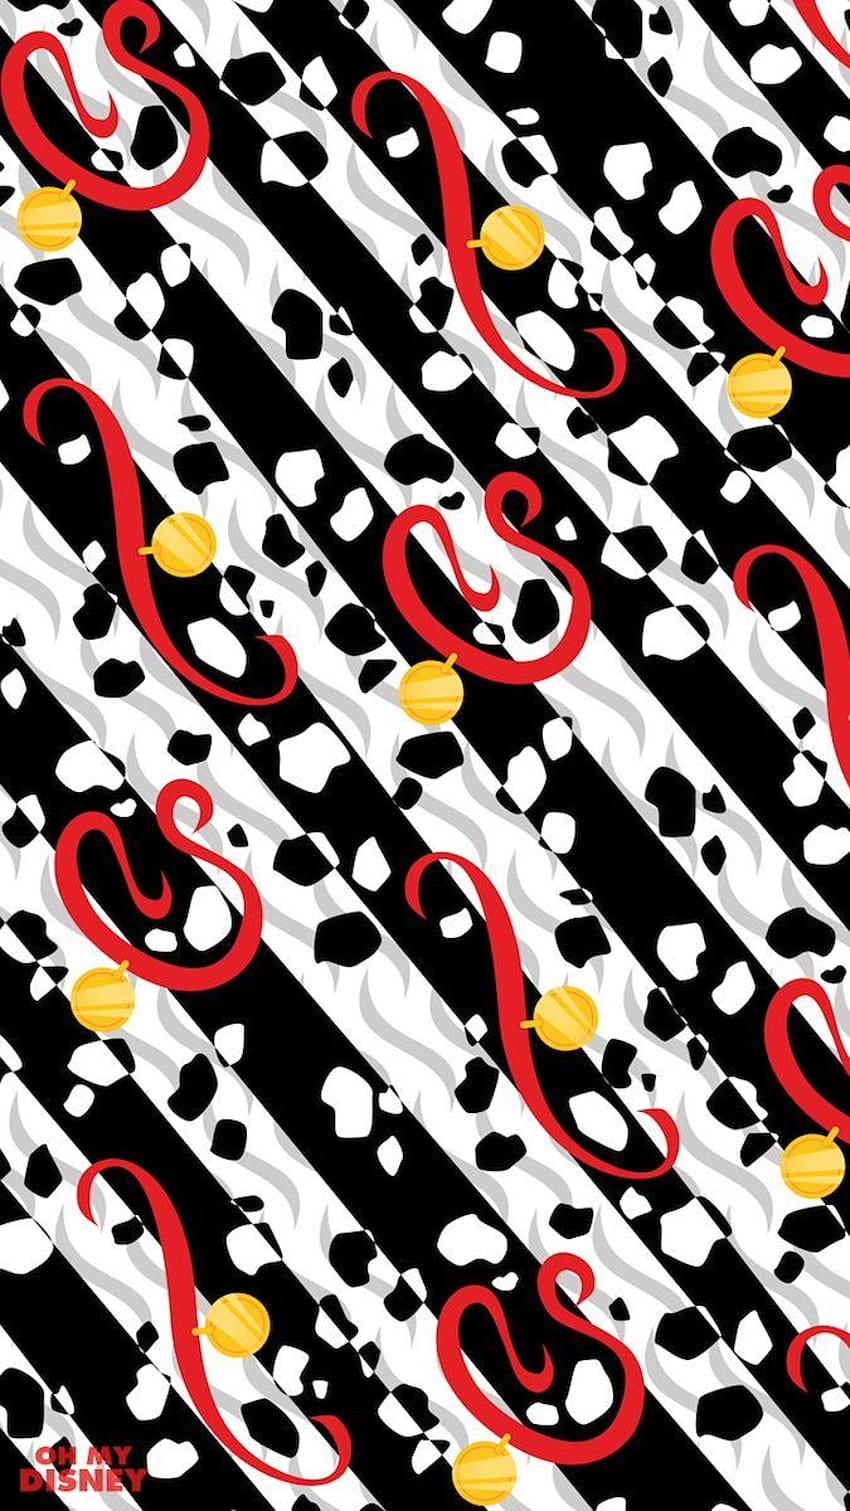 These Disney Villain Phone Inspired By Gift Wrap Paper, disney villains HD phone wallpaper